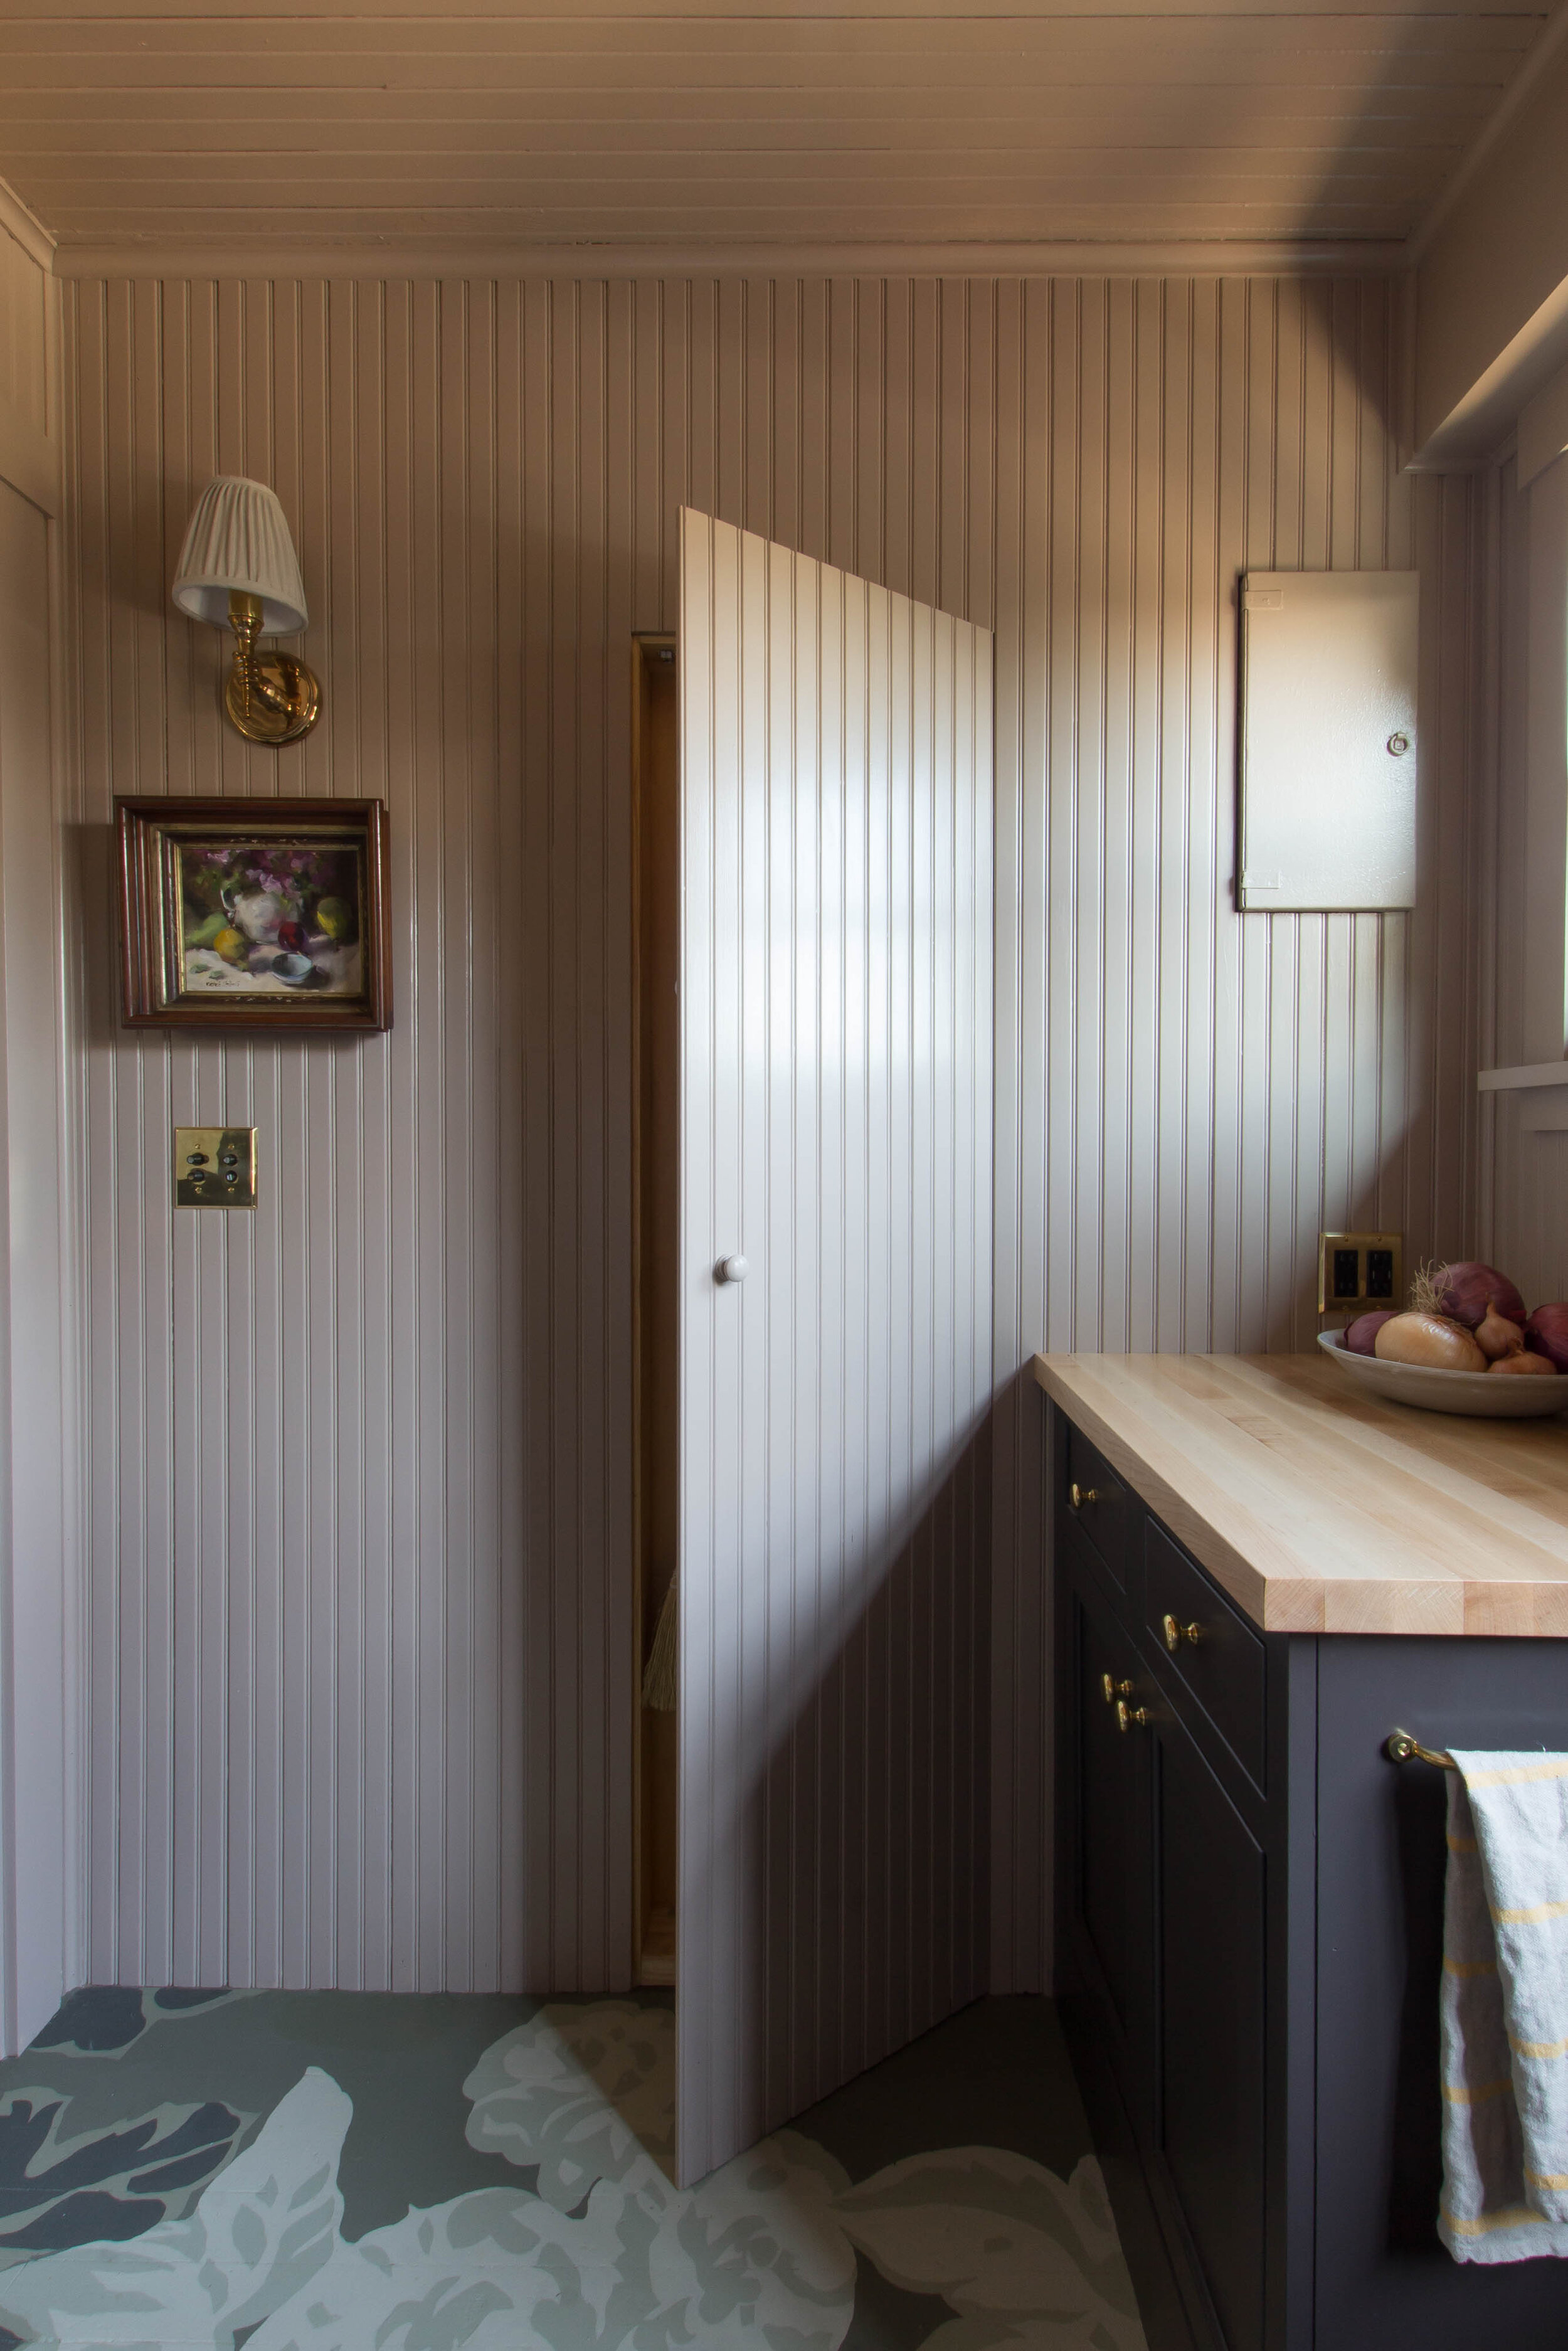  Seattle Scullery Designed by: Studio Laloc, Lauren L Caron - Photo by: Lauren L Caron © 2020  The beadboard paneling perfectly disguises the broom closet door. 